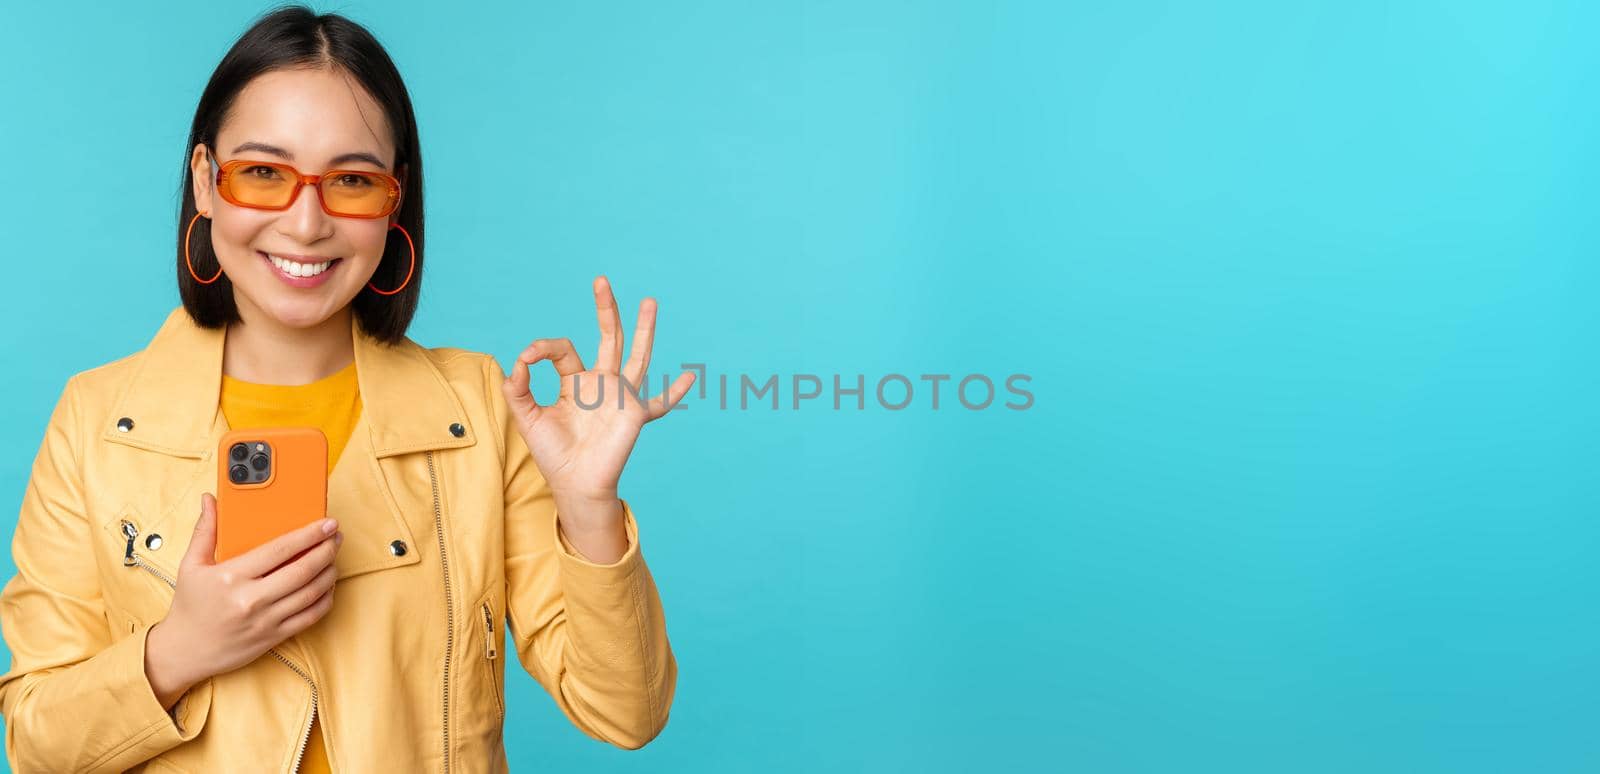 Smiling asian girl with smartphone, shwoing okay, ok sign in approval, standing over blue background. Copy space